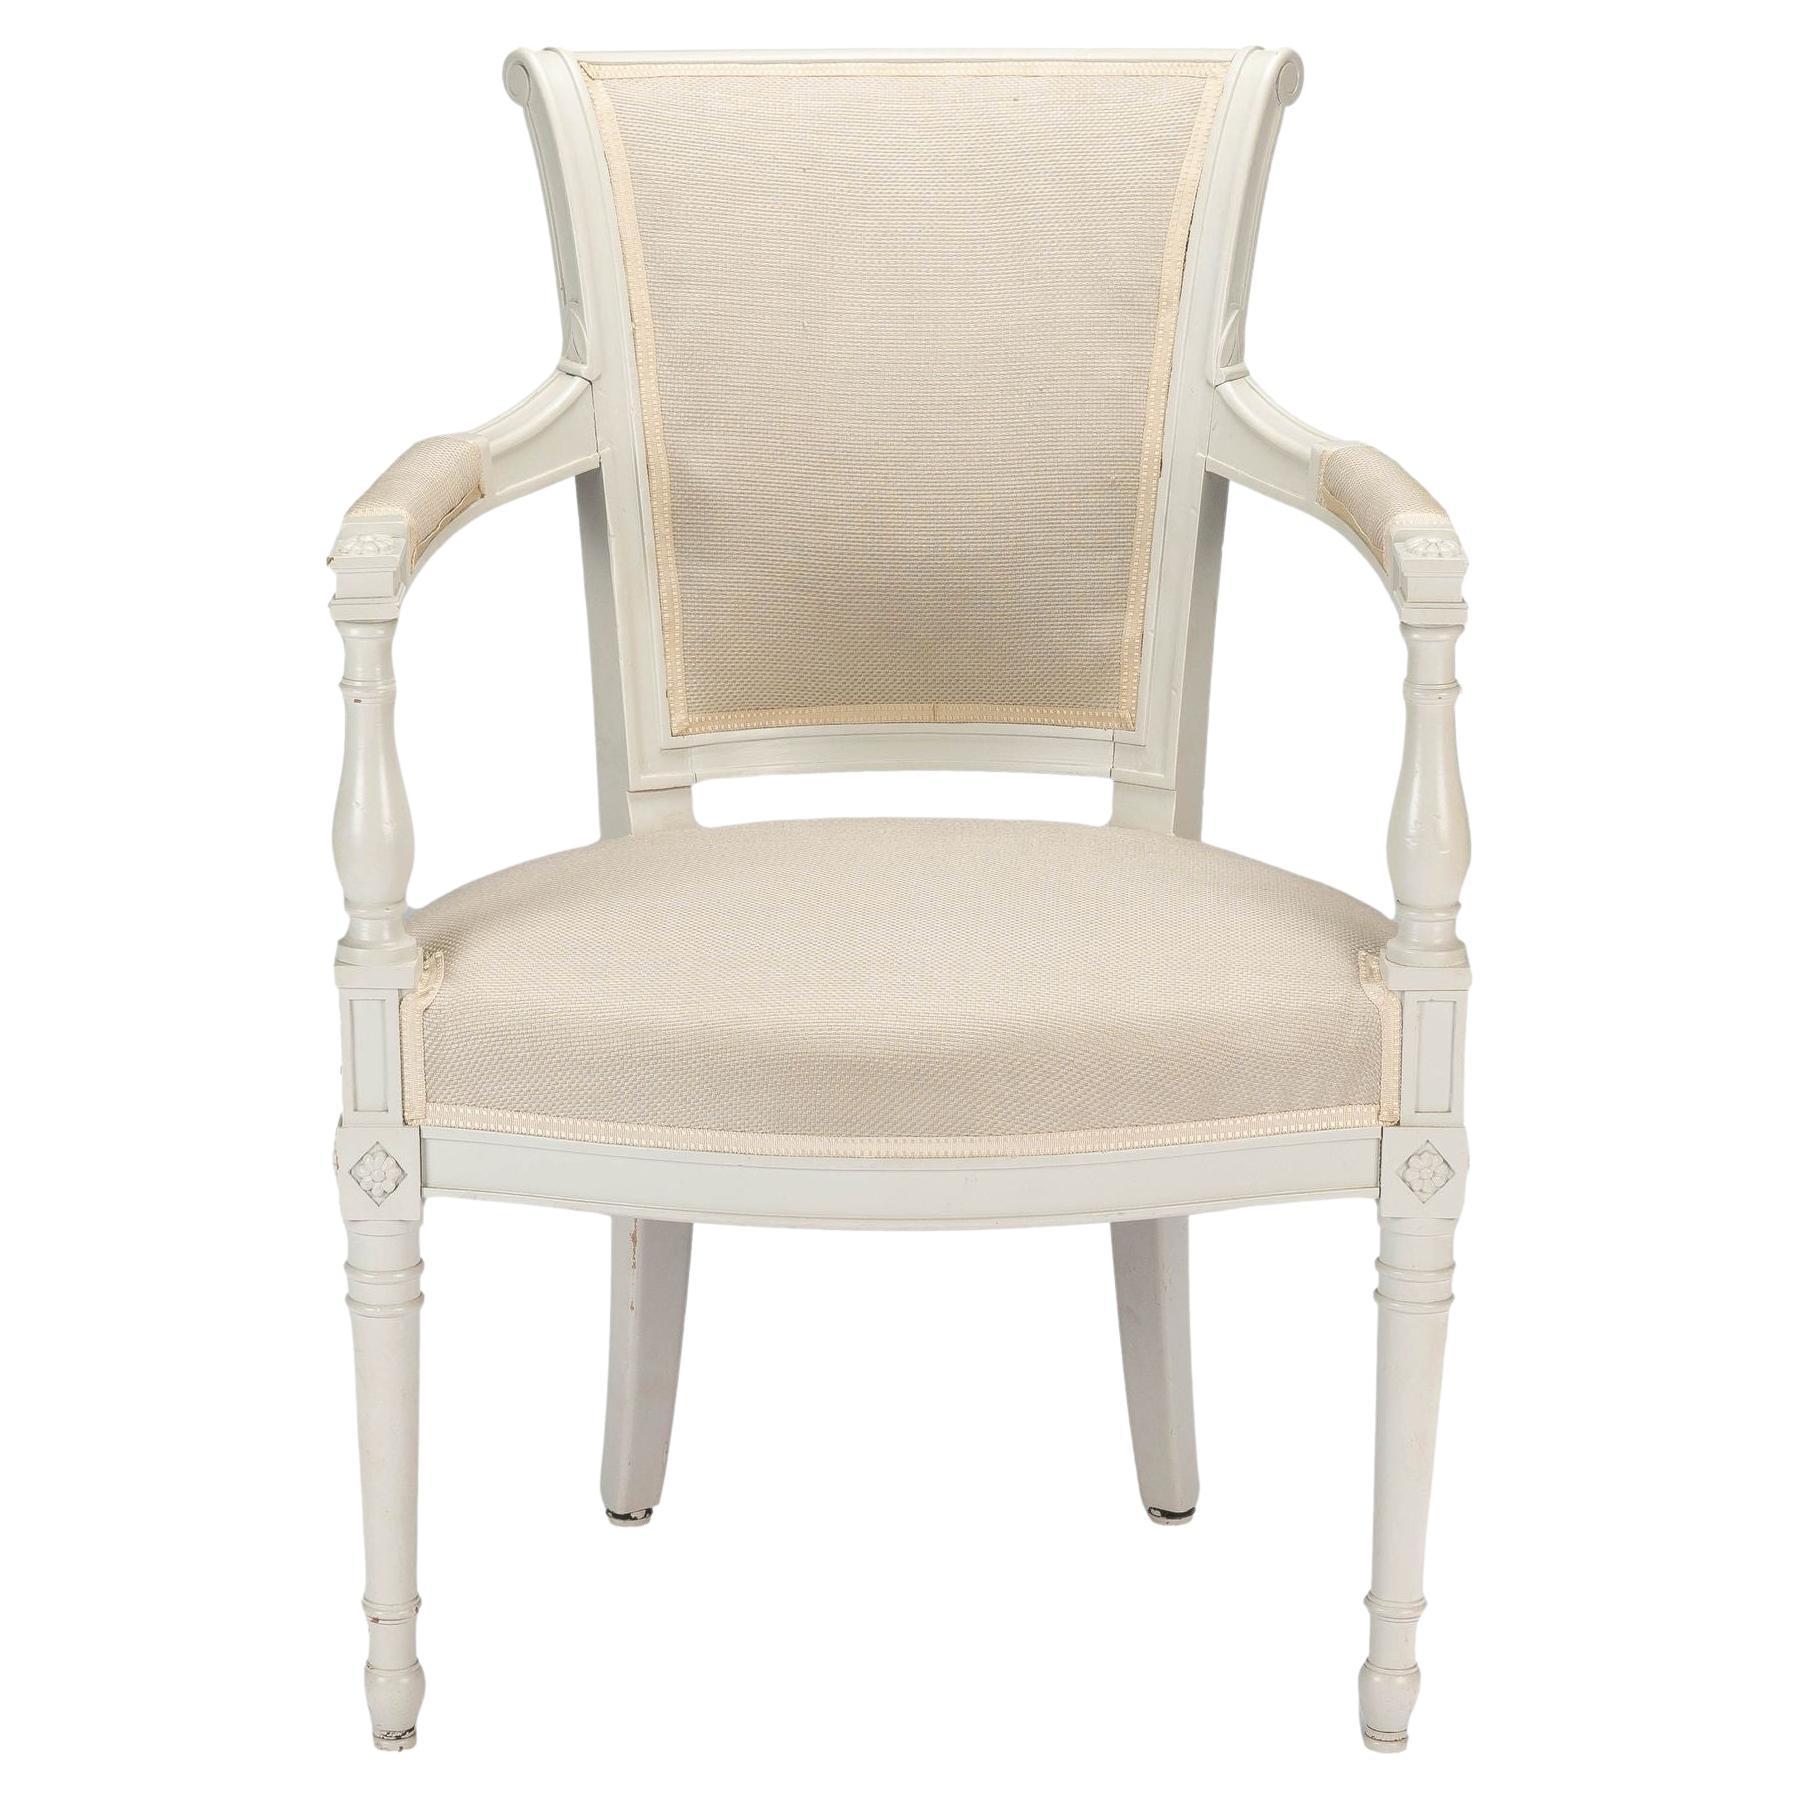 French Louis XVI Style Painted & Upholstered Armchair, c. 1910-30 For Sale